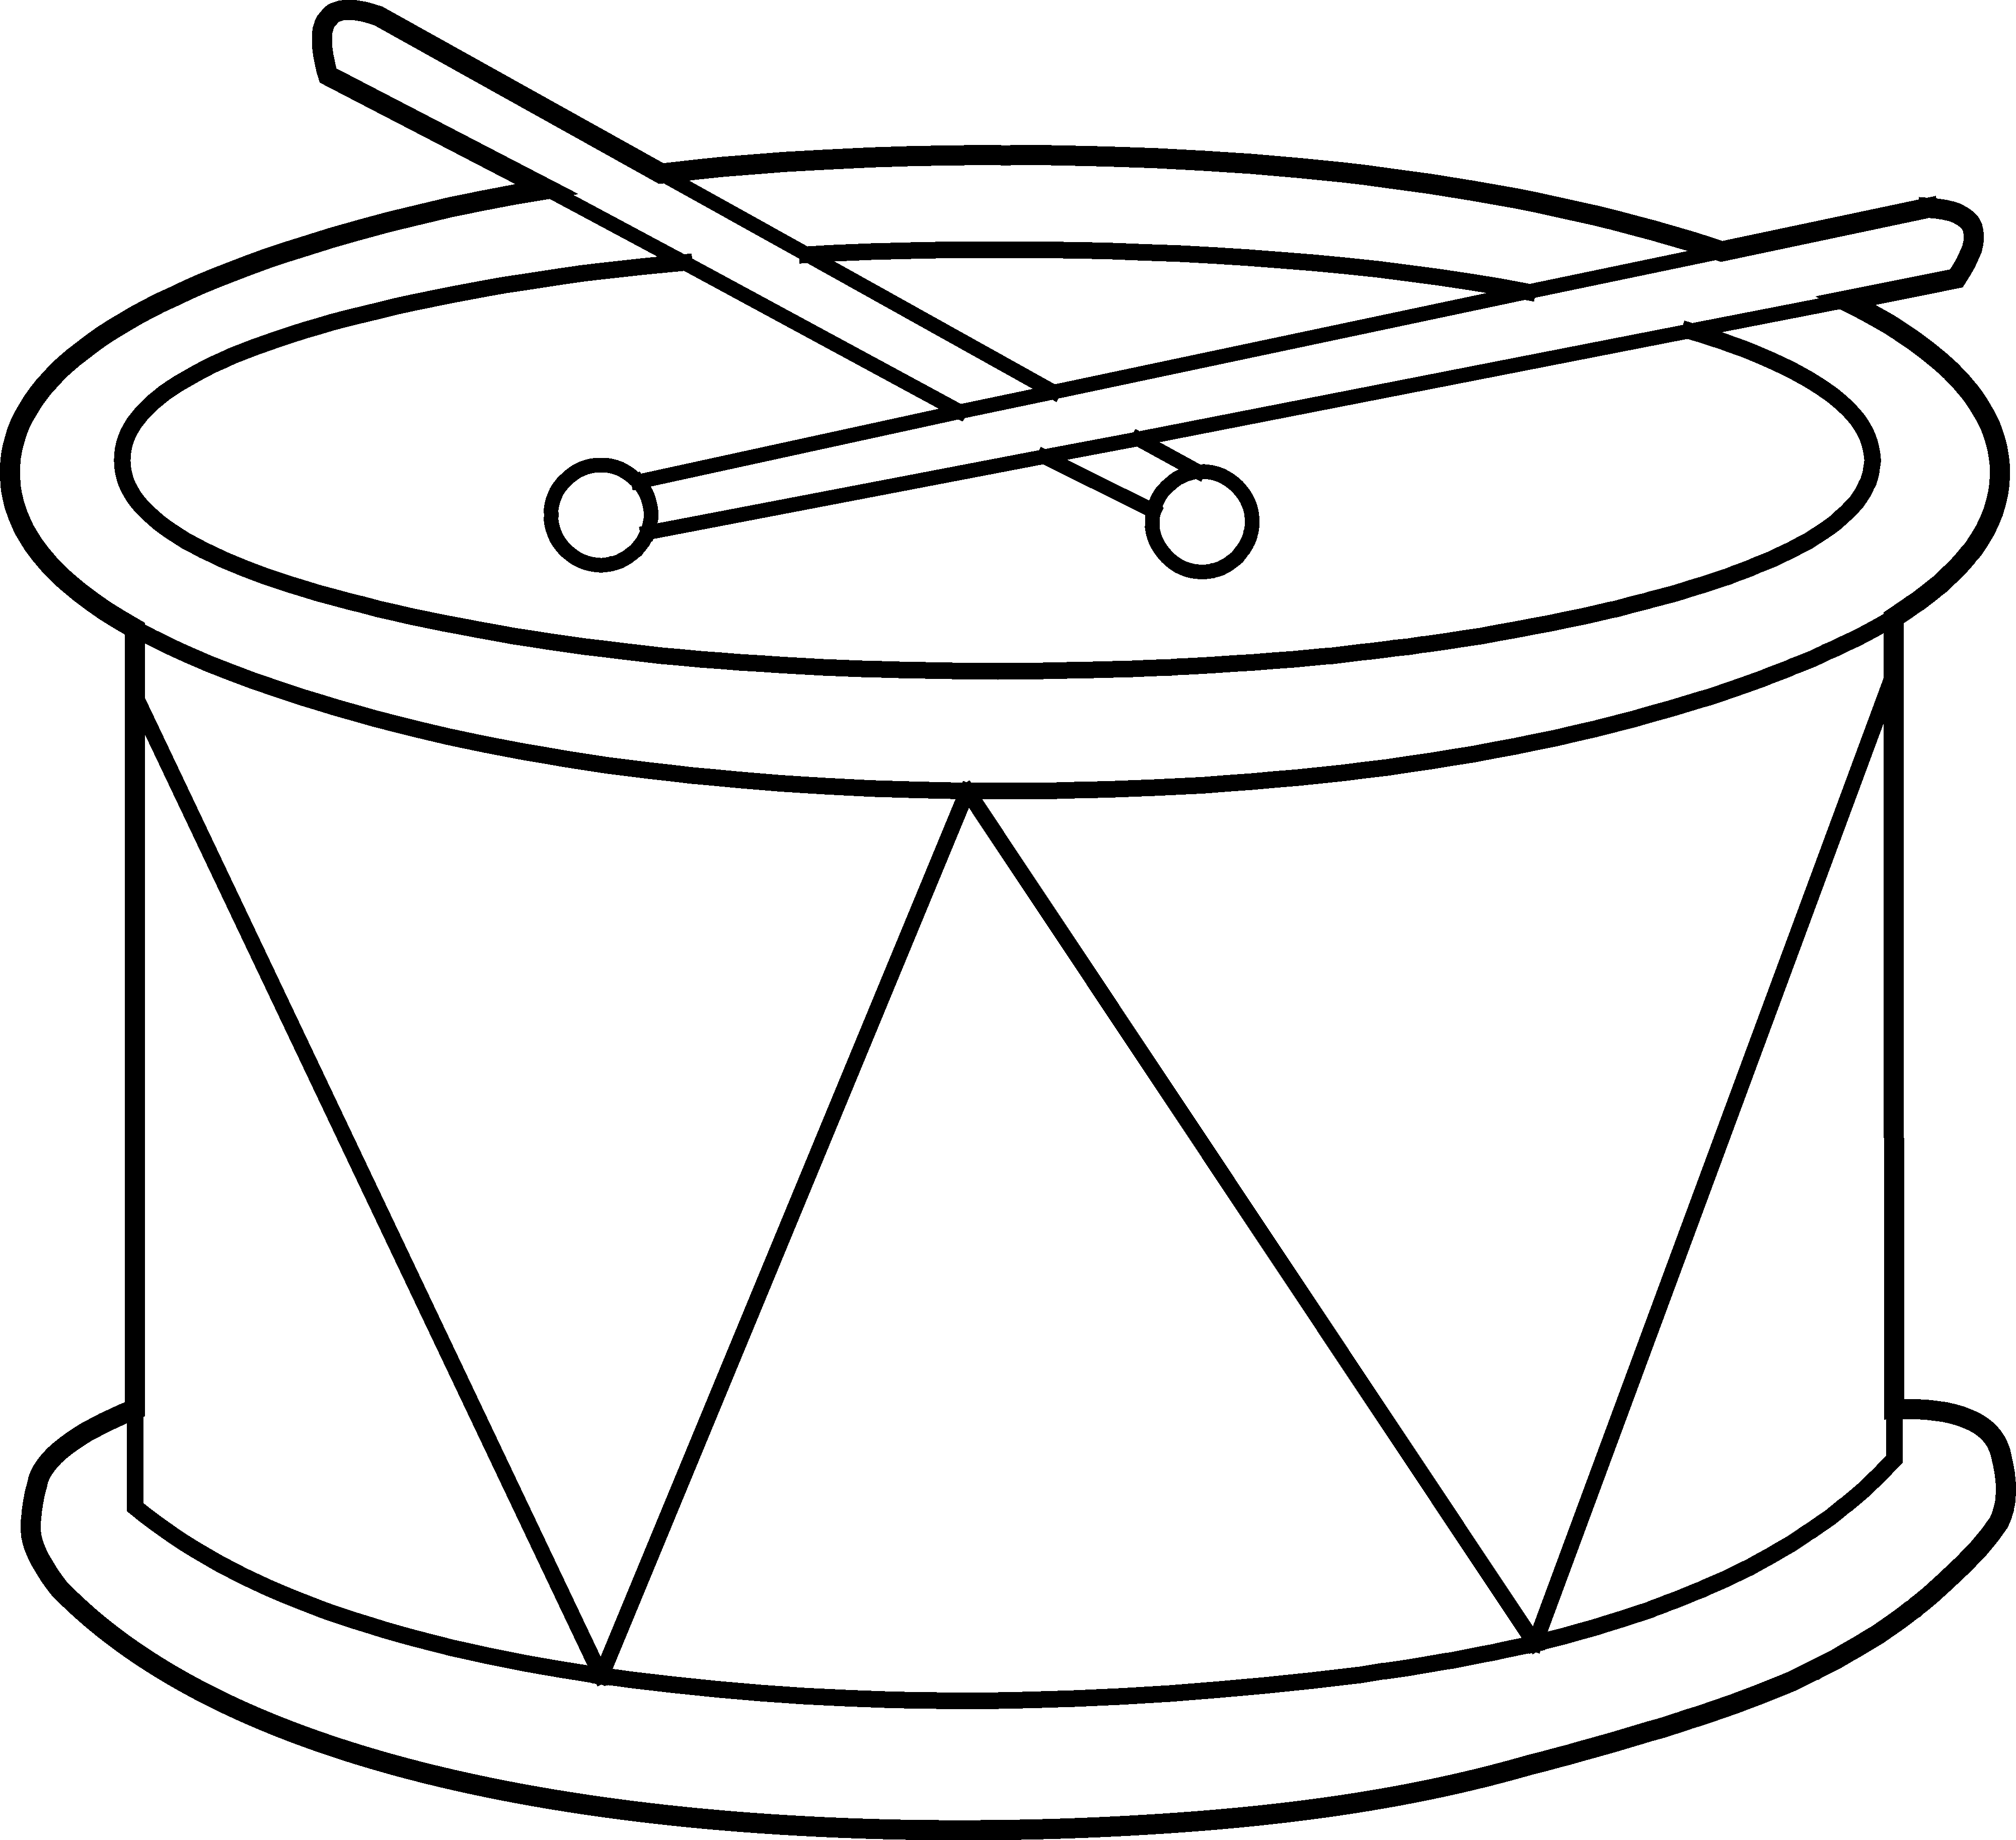 Free Drum Pictures, Download Free Clip Art, Free Clip Art on.